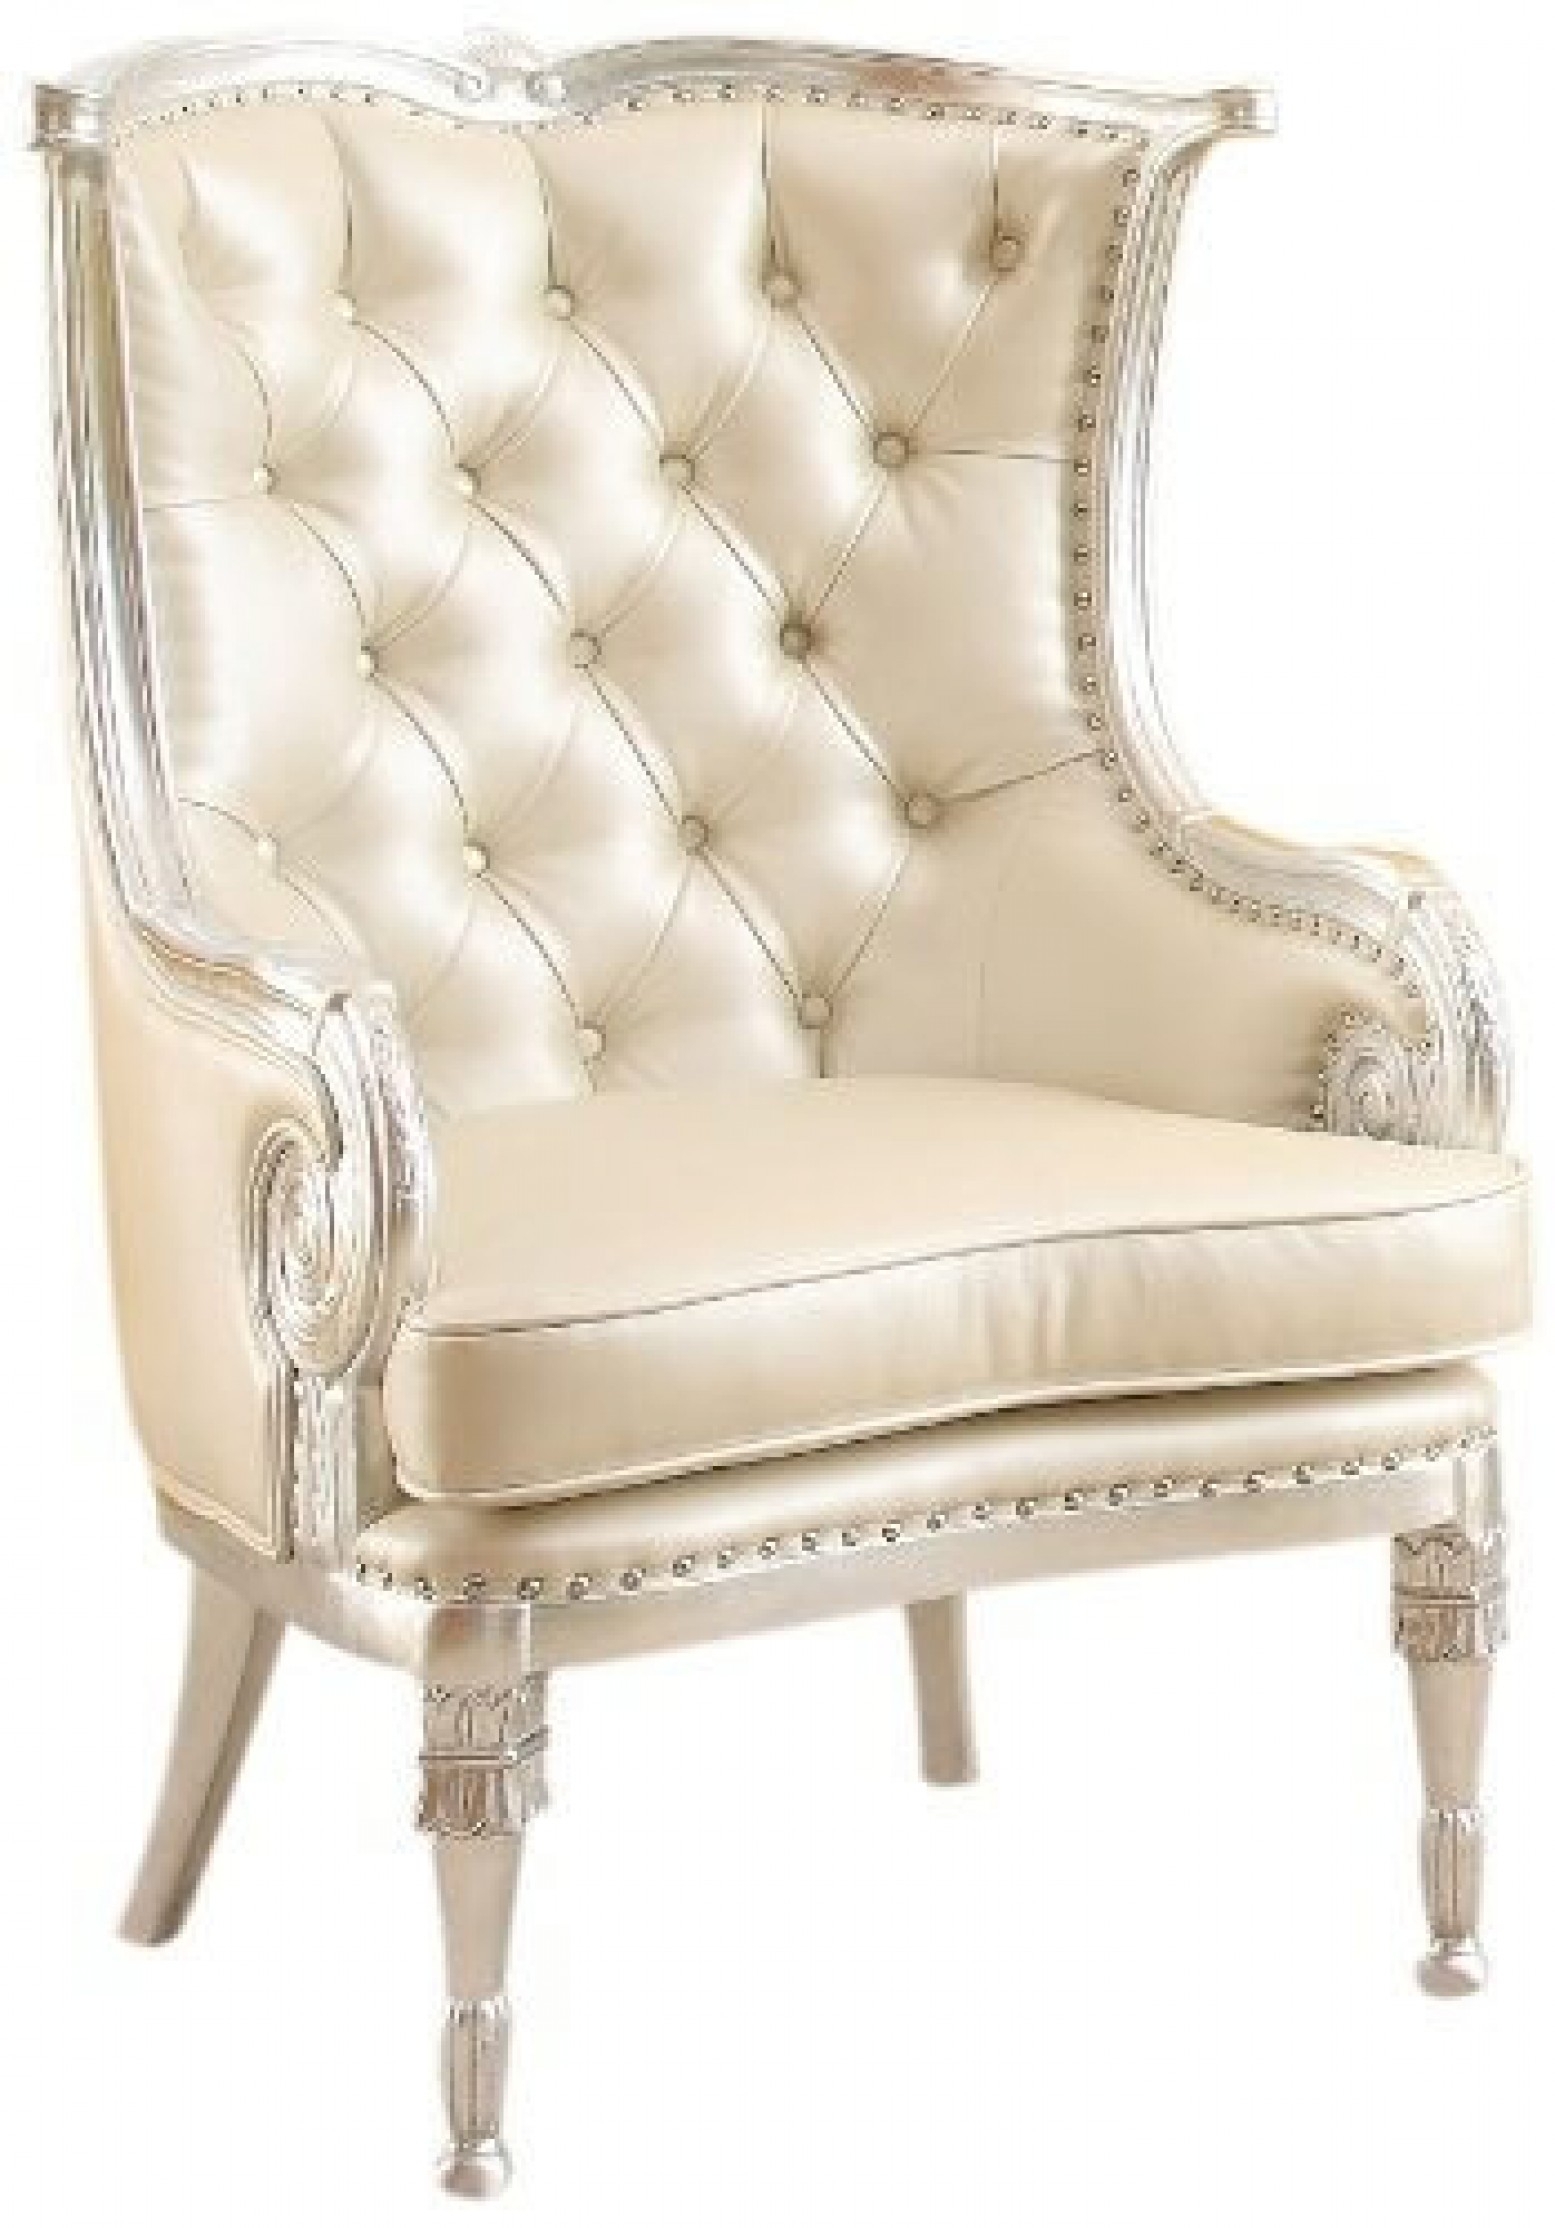 Antique Living Room Chairs Ideas On Foter